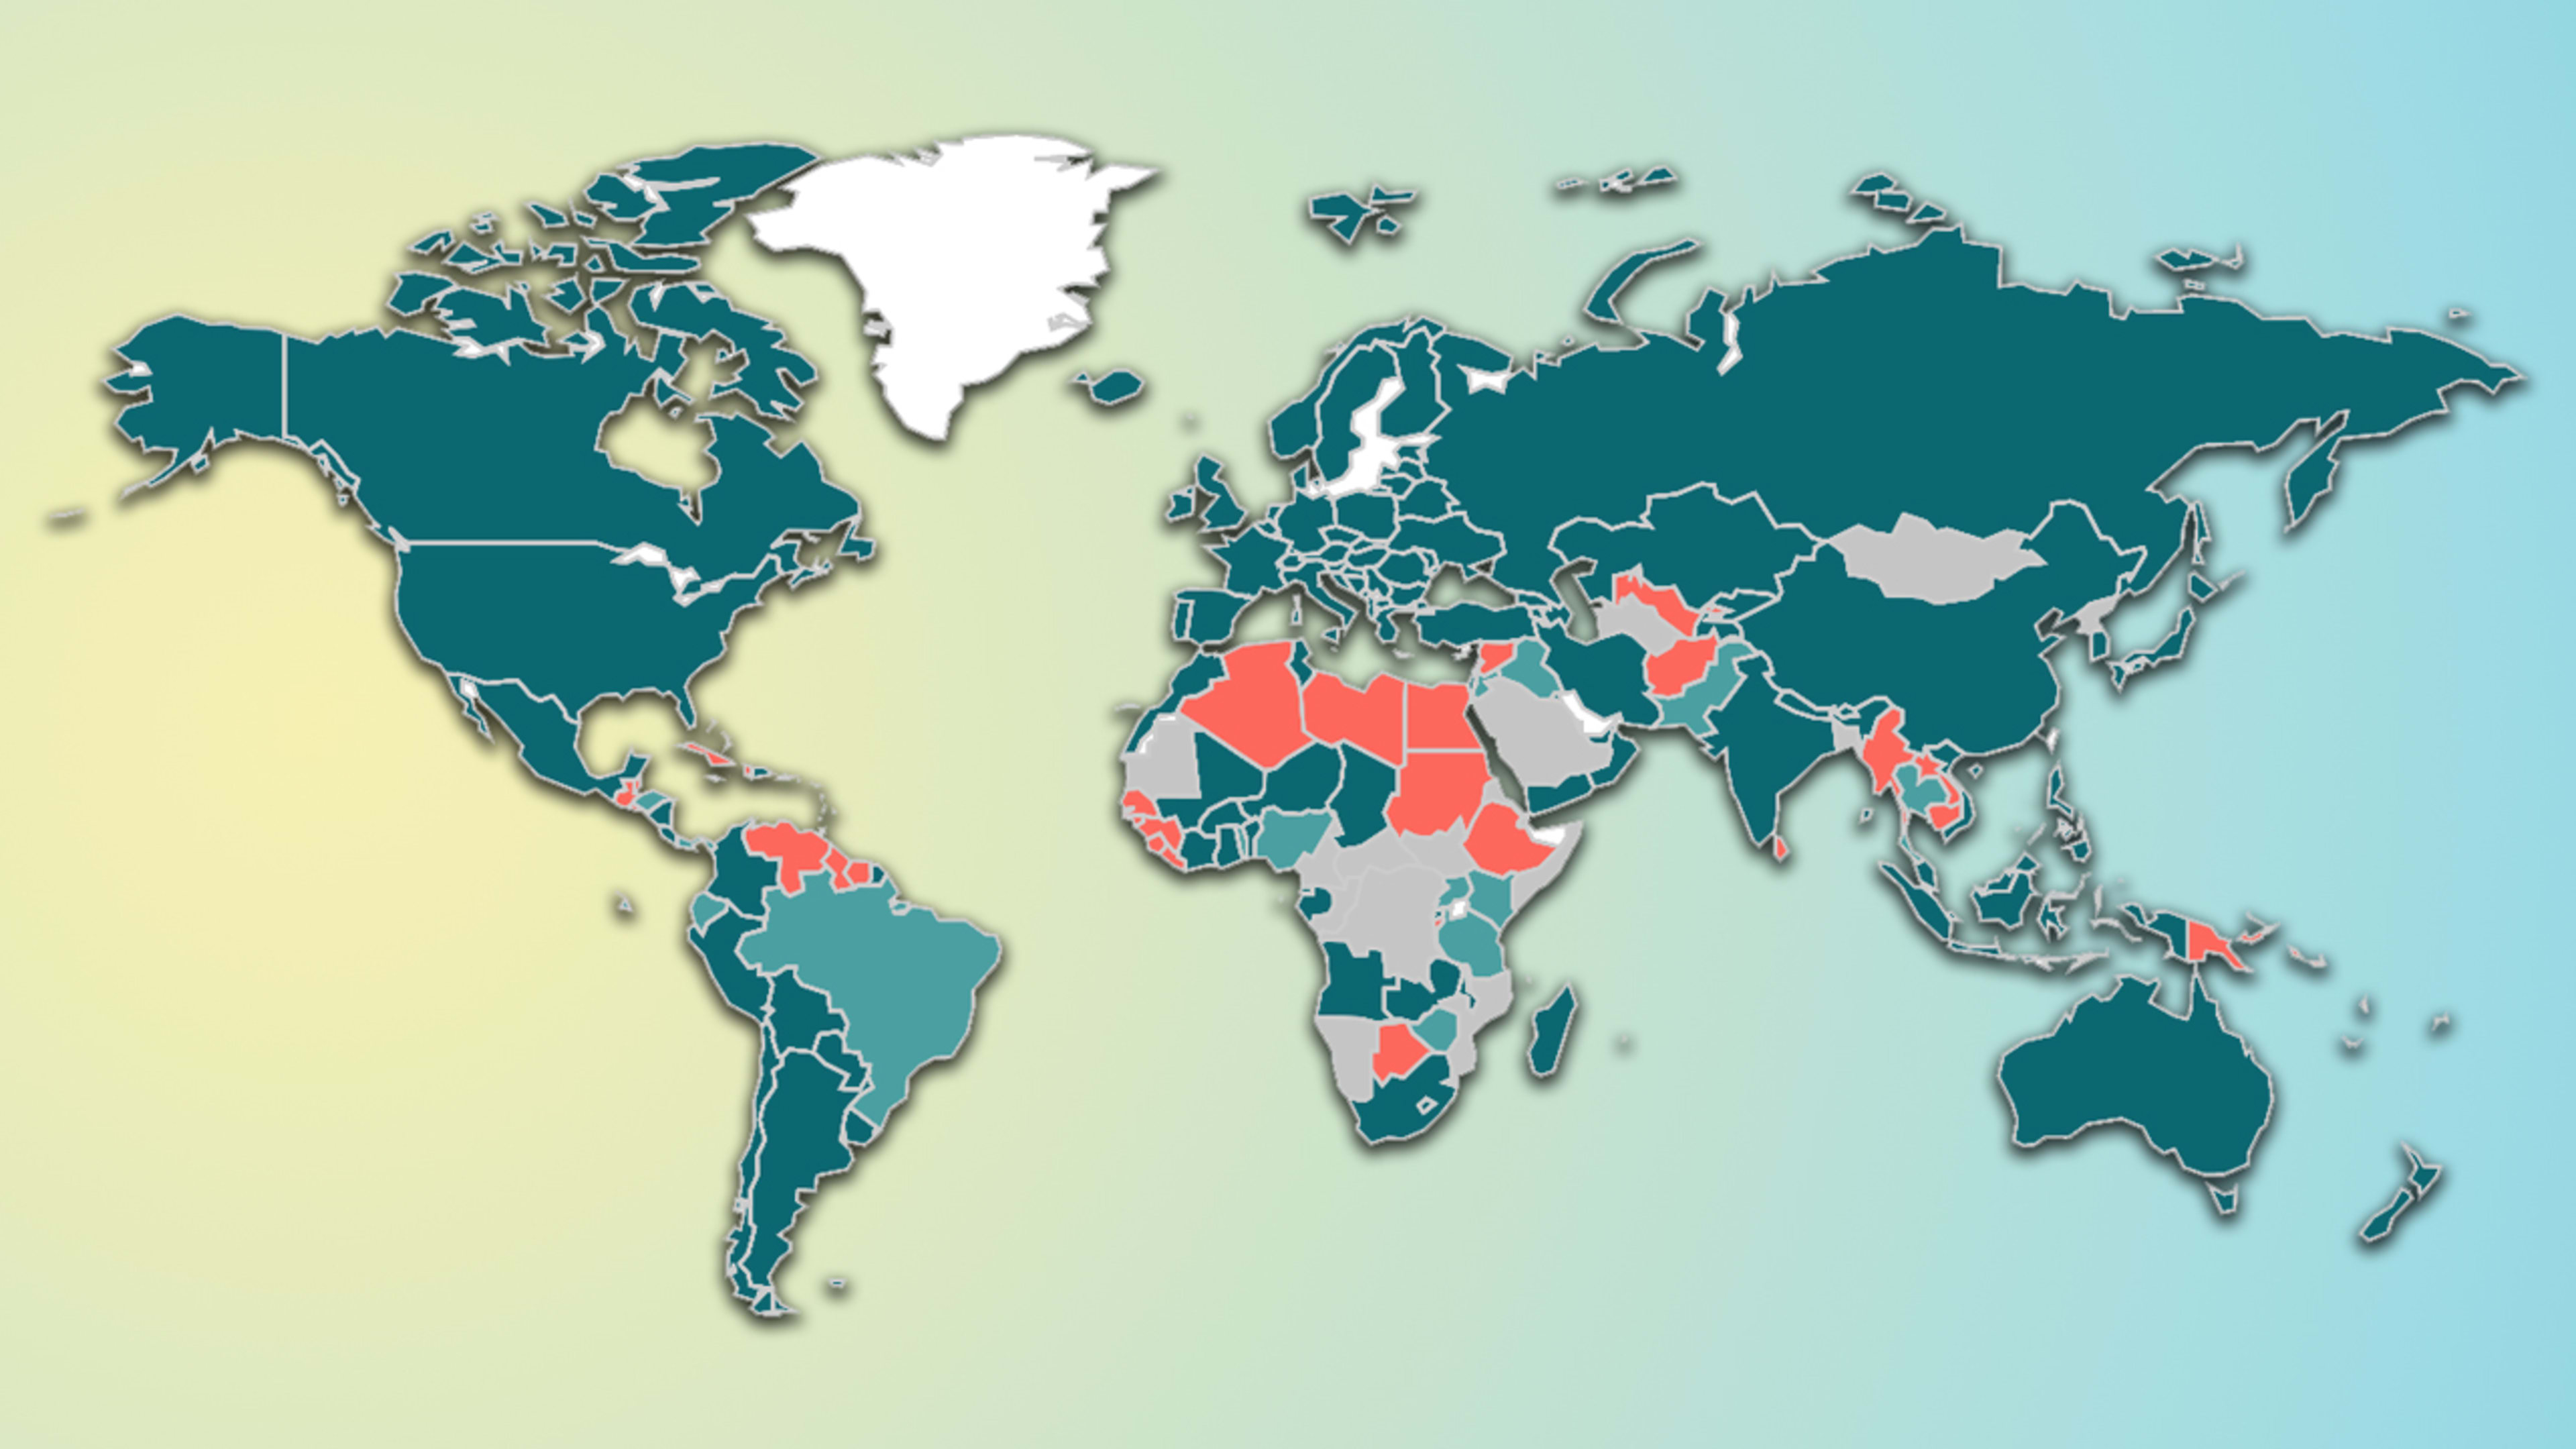 This U.N. map tracks data protection laws around the world